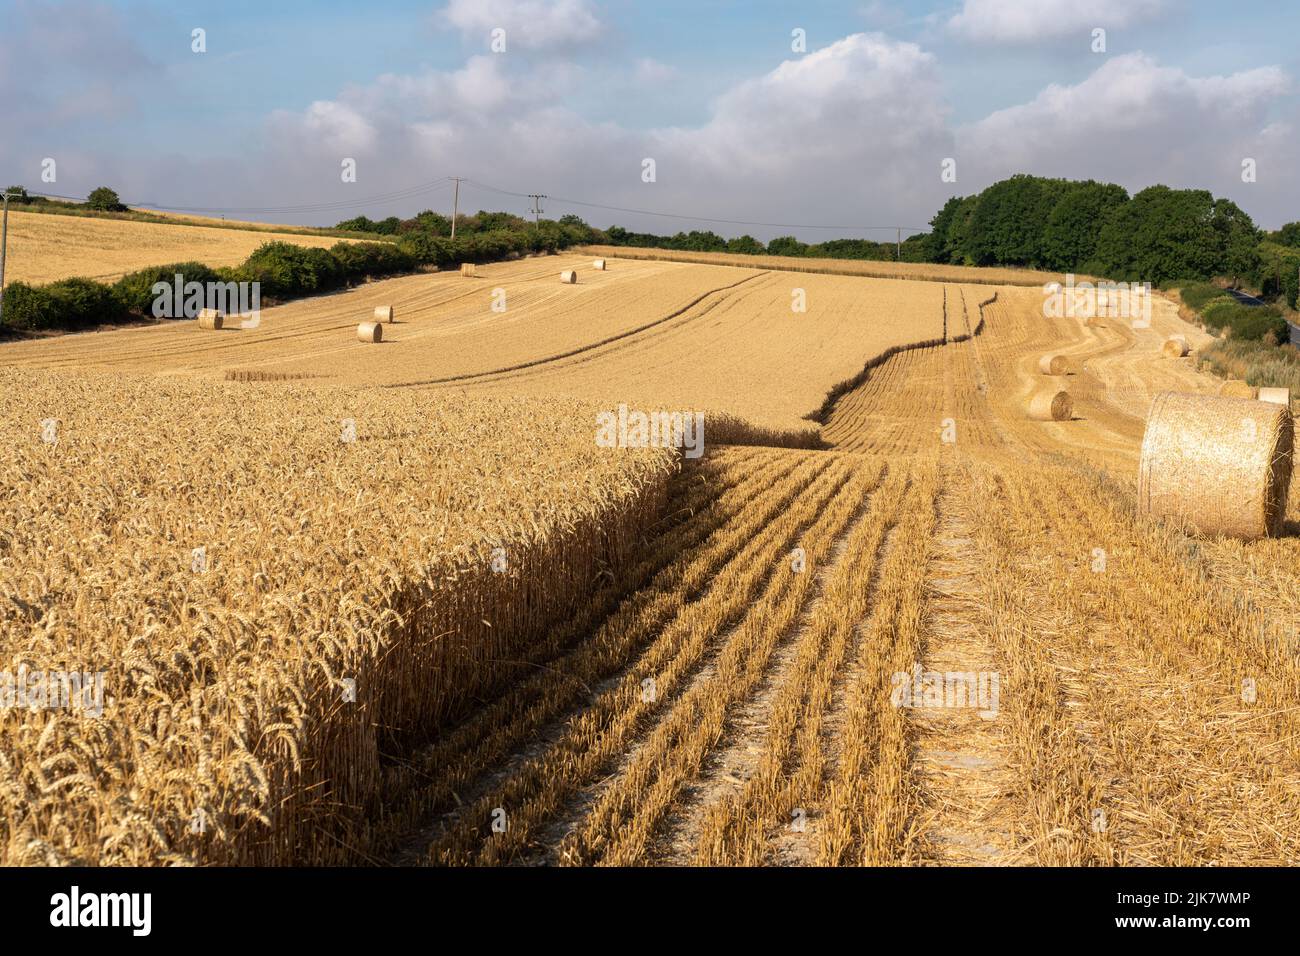 Wheat field at harvest time Stock Photo